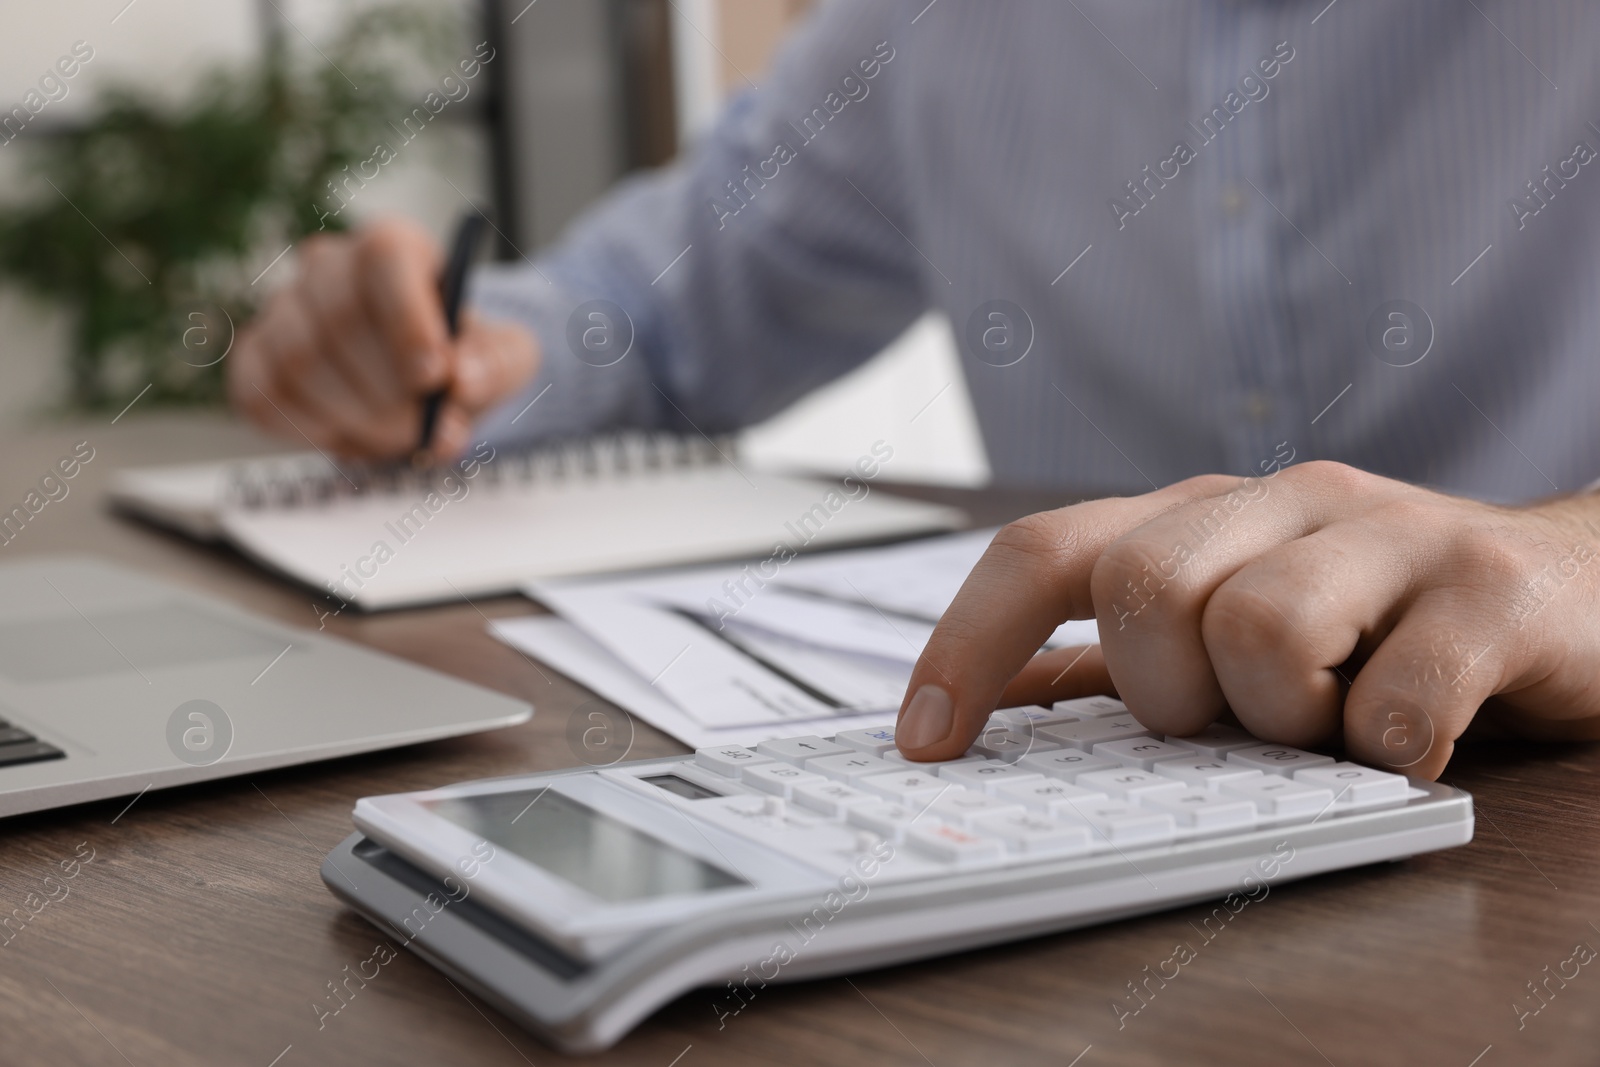 Photo of Man using calculator while taking notes at wooden table indoors, closeup